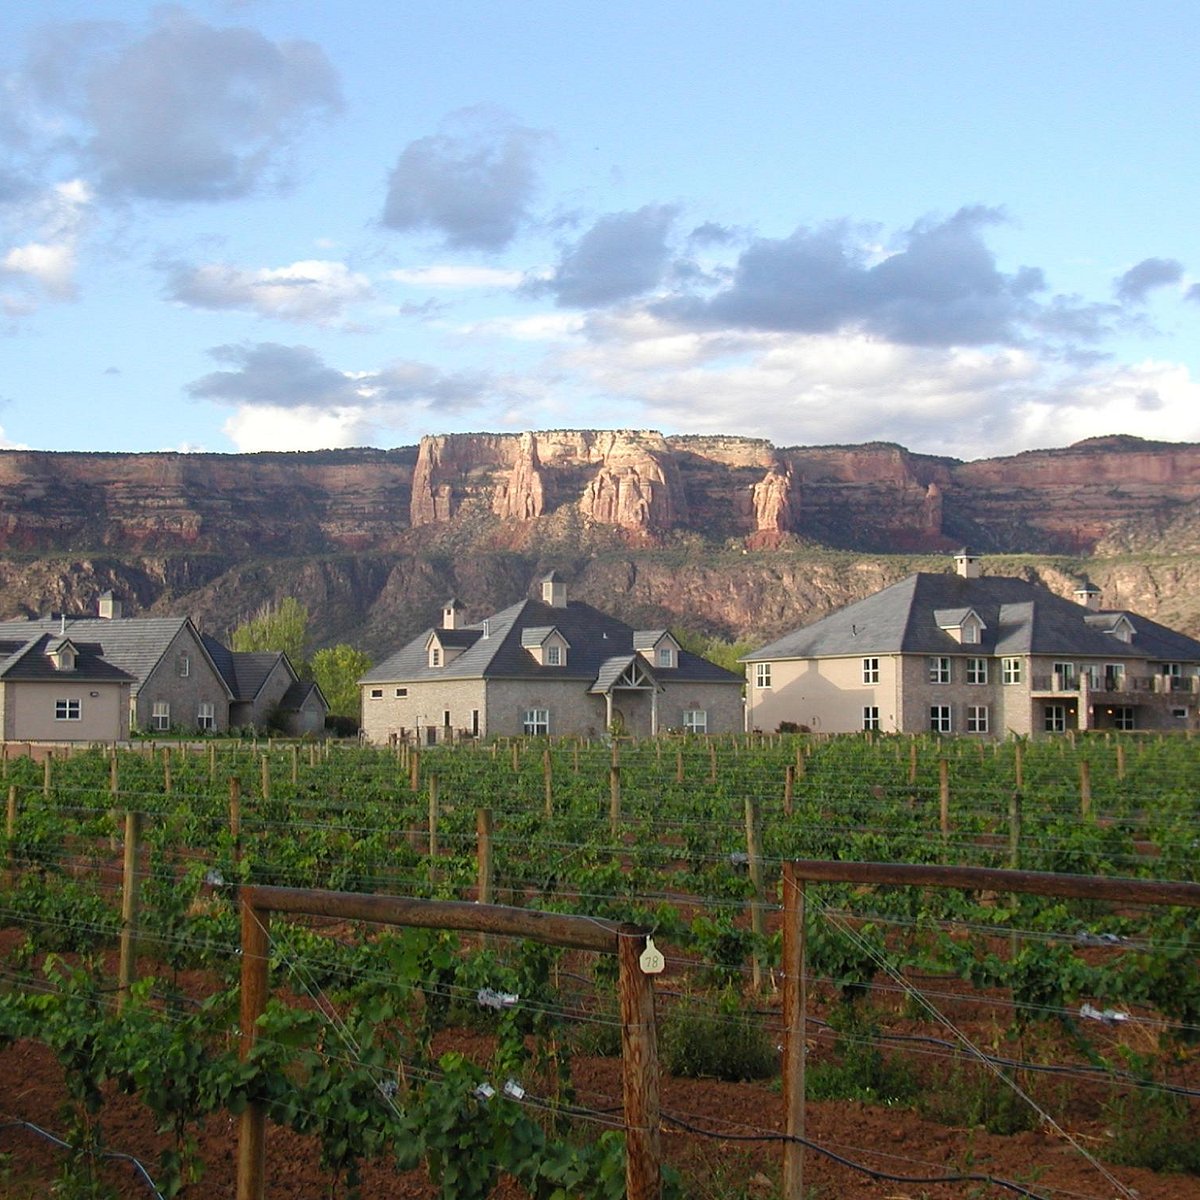 winery tours grand junction